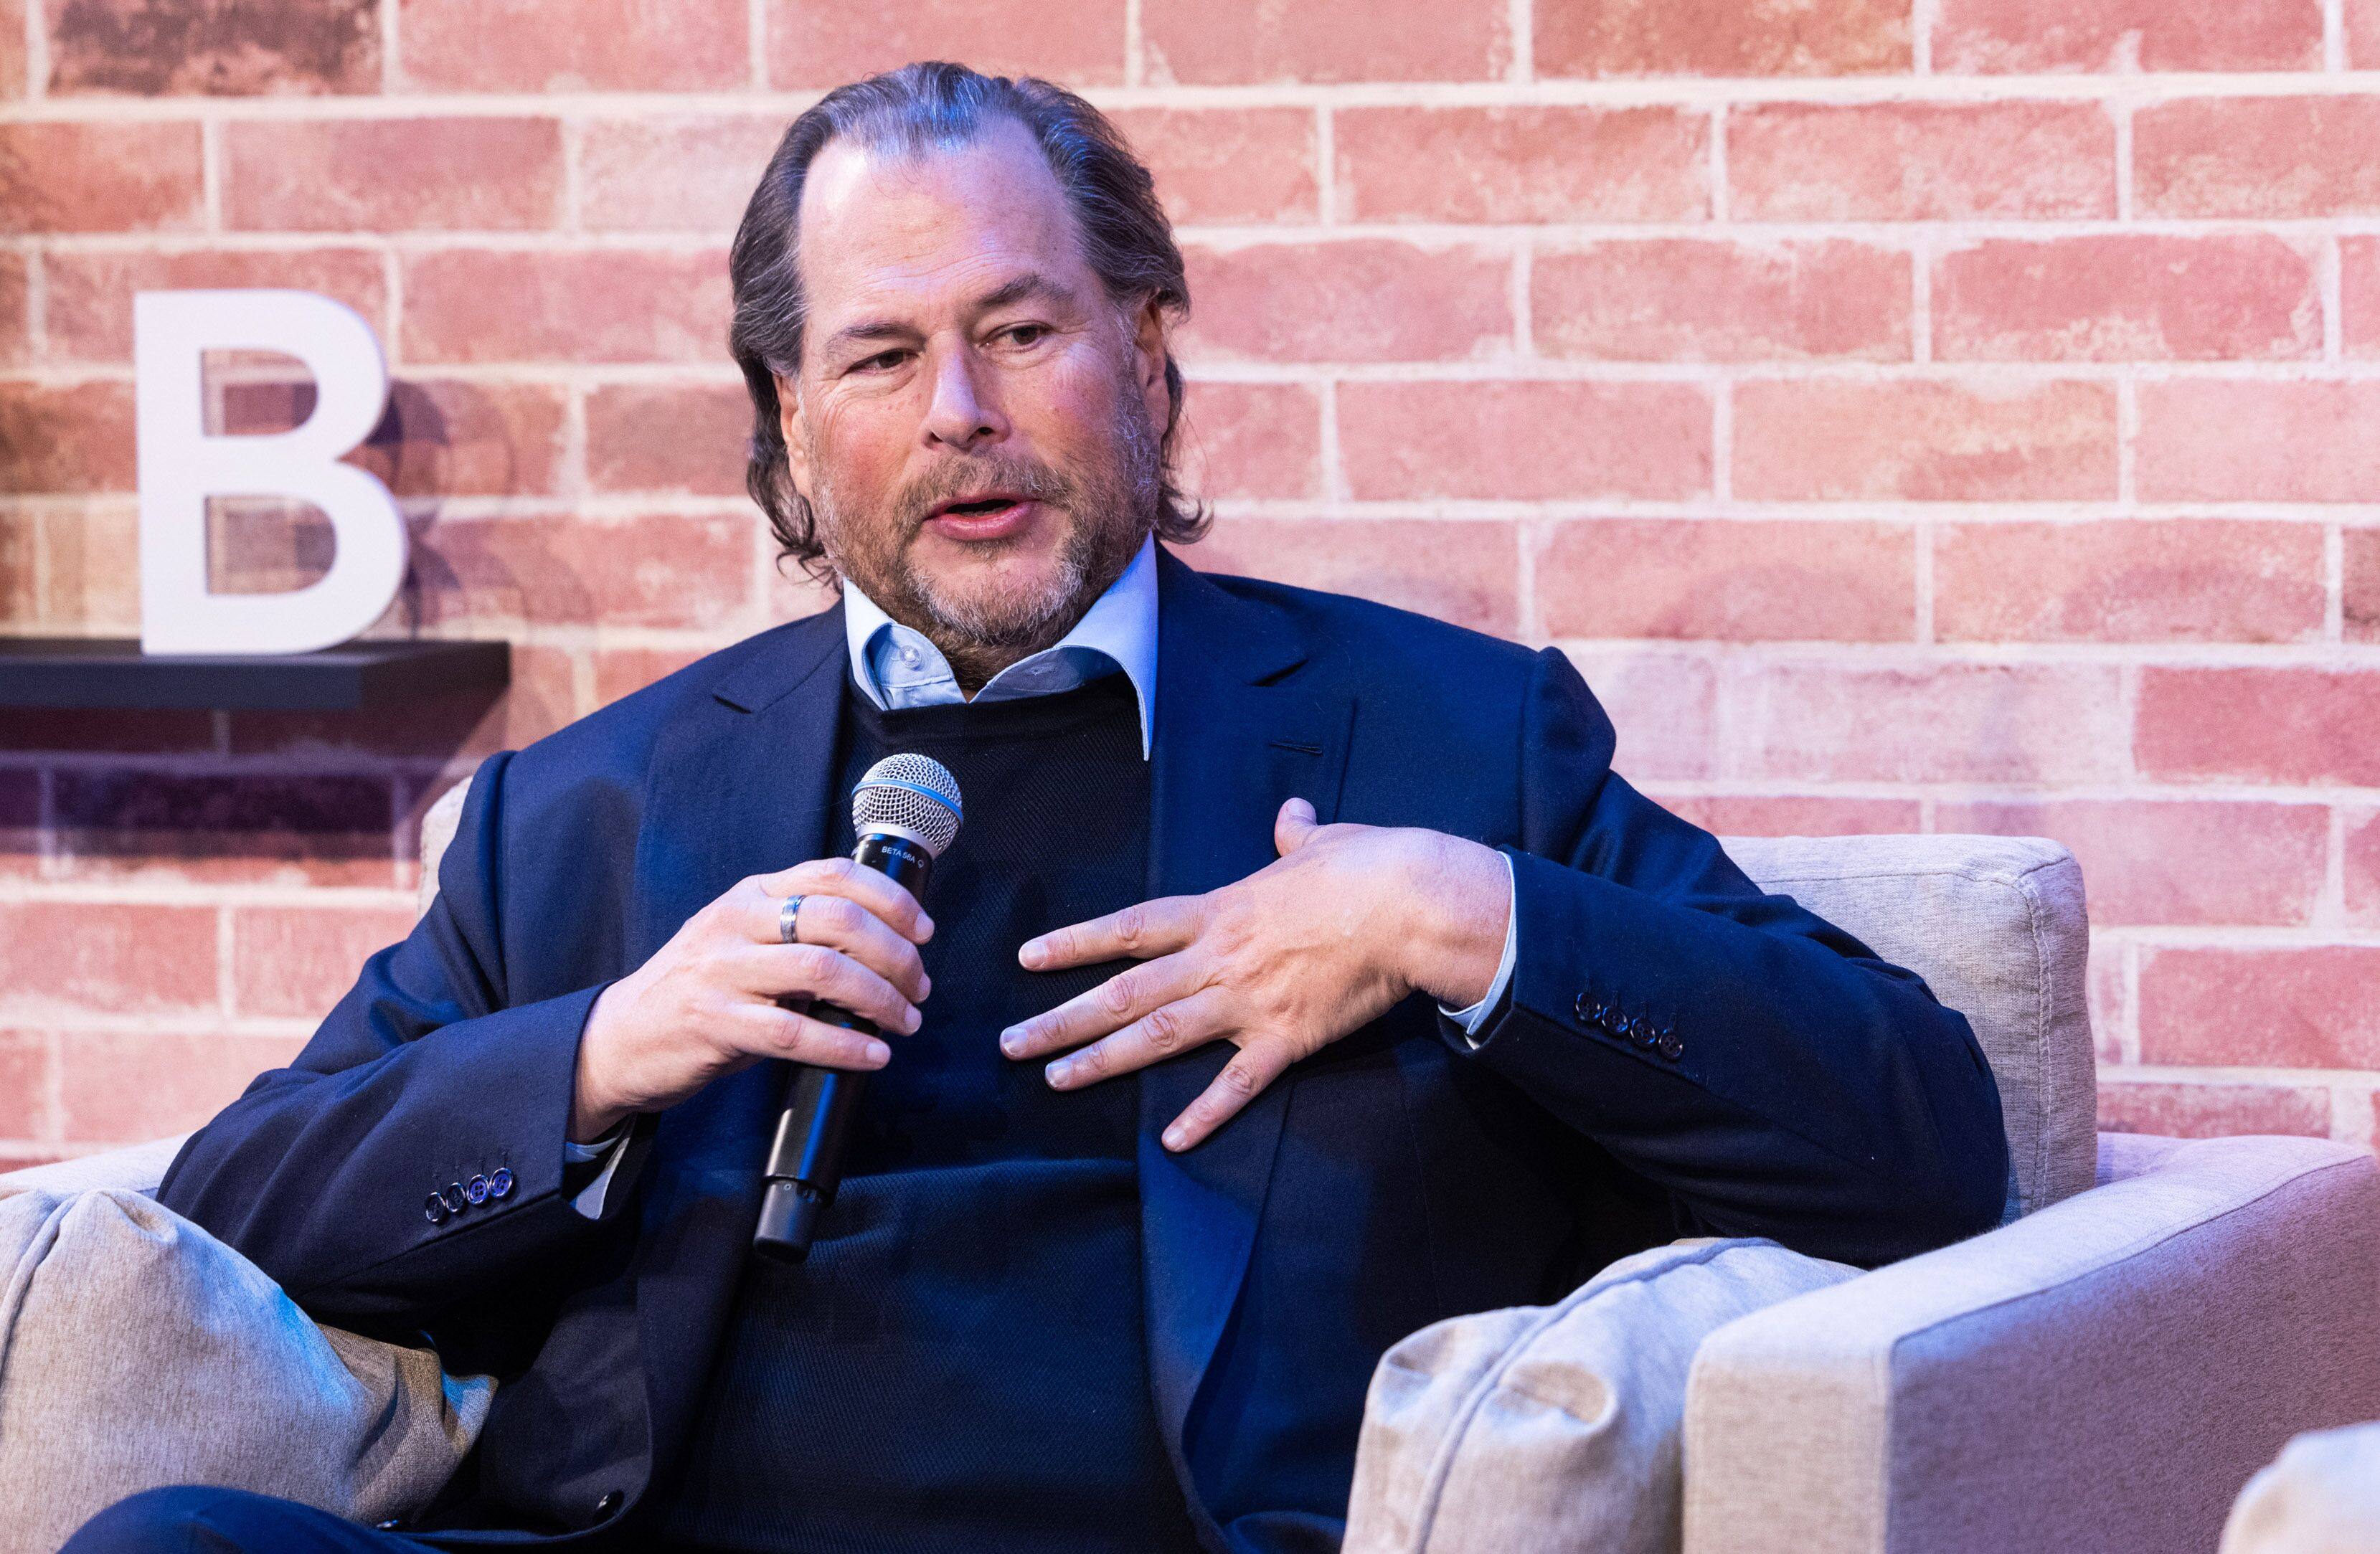 Marc Benioff, CEO of Salesforce.com, at the World Economic Forum in Davos, Switzerland, on Tuesday. Photo: Bloomberg